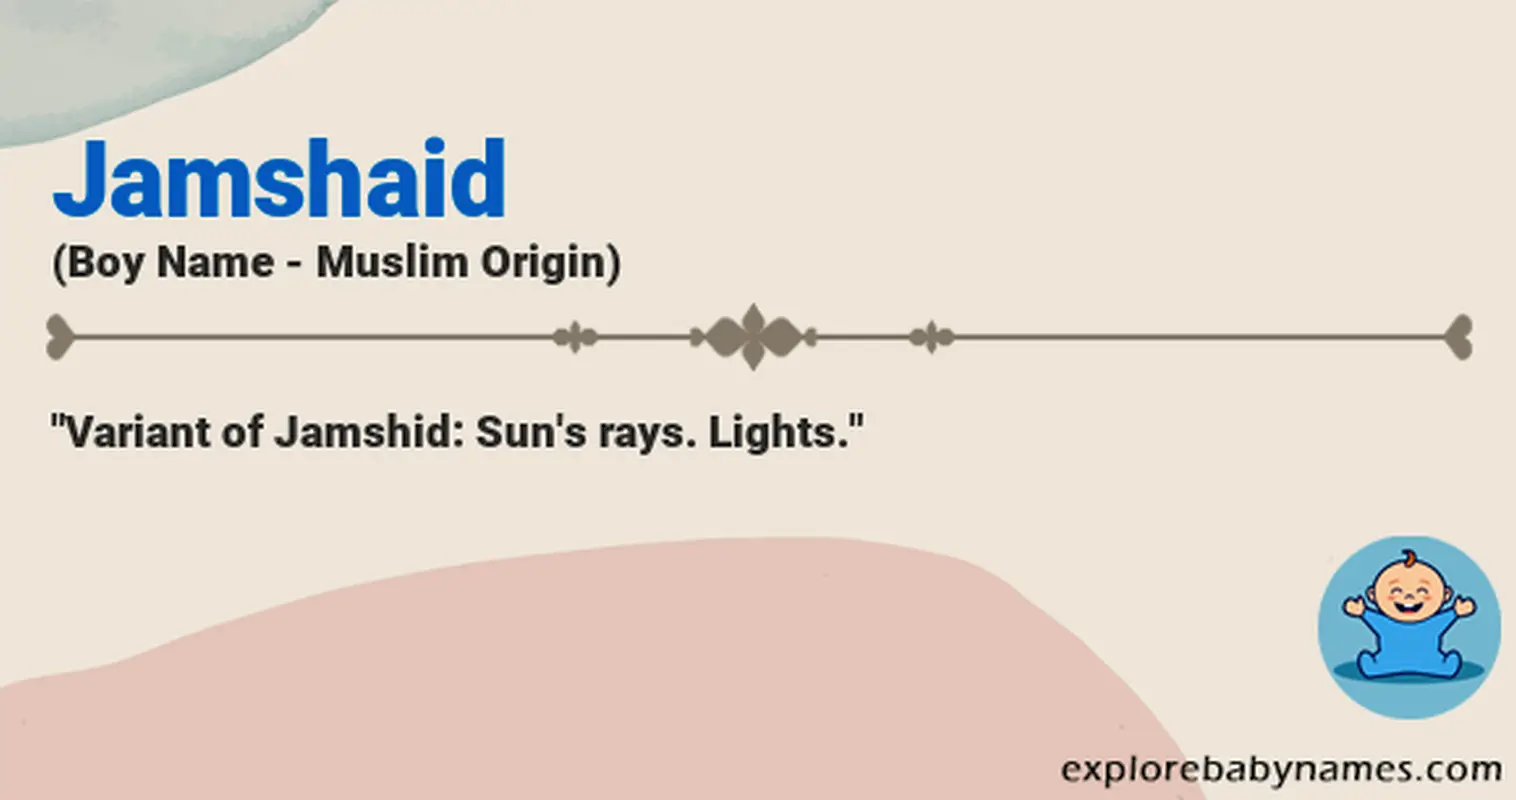 Meaning of Jamshaid